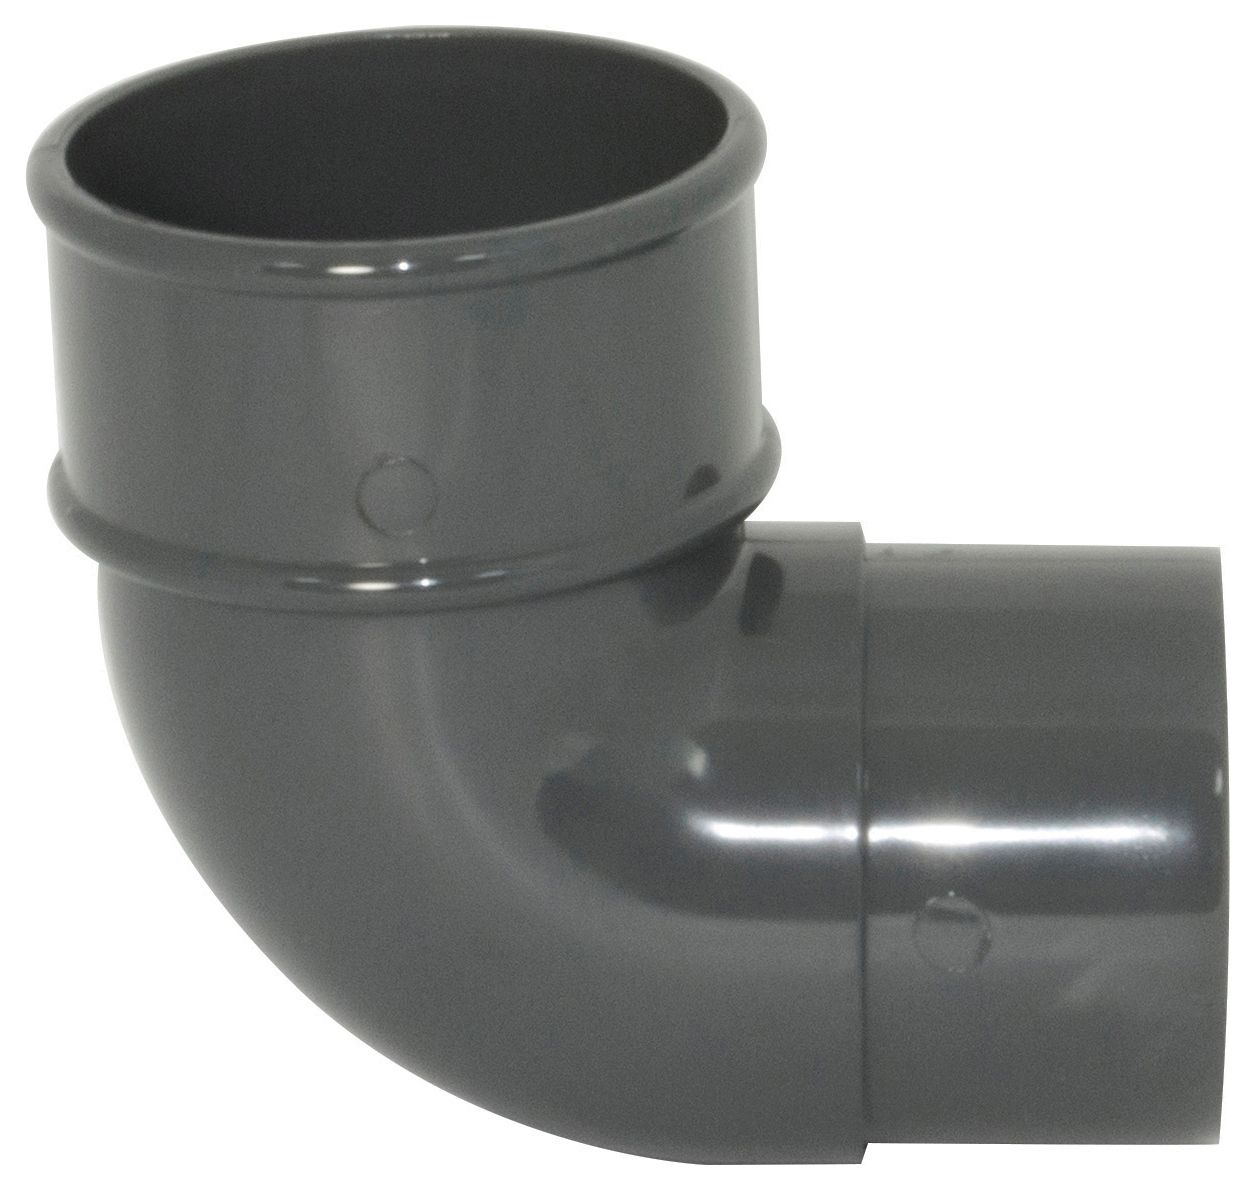 Image of FloPlast 68mm Round Line Downpipe 92.5° Bend - Anthracite Grey